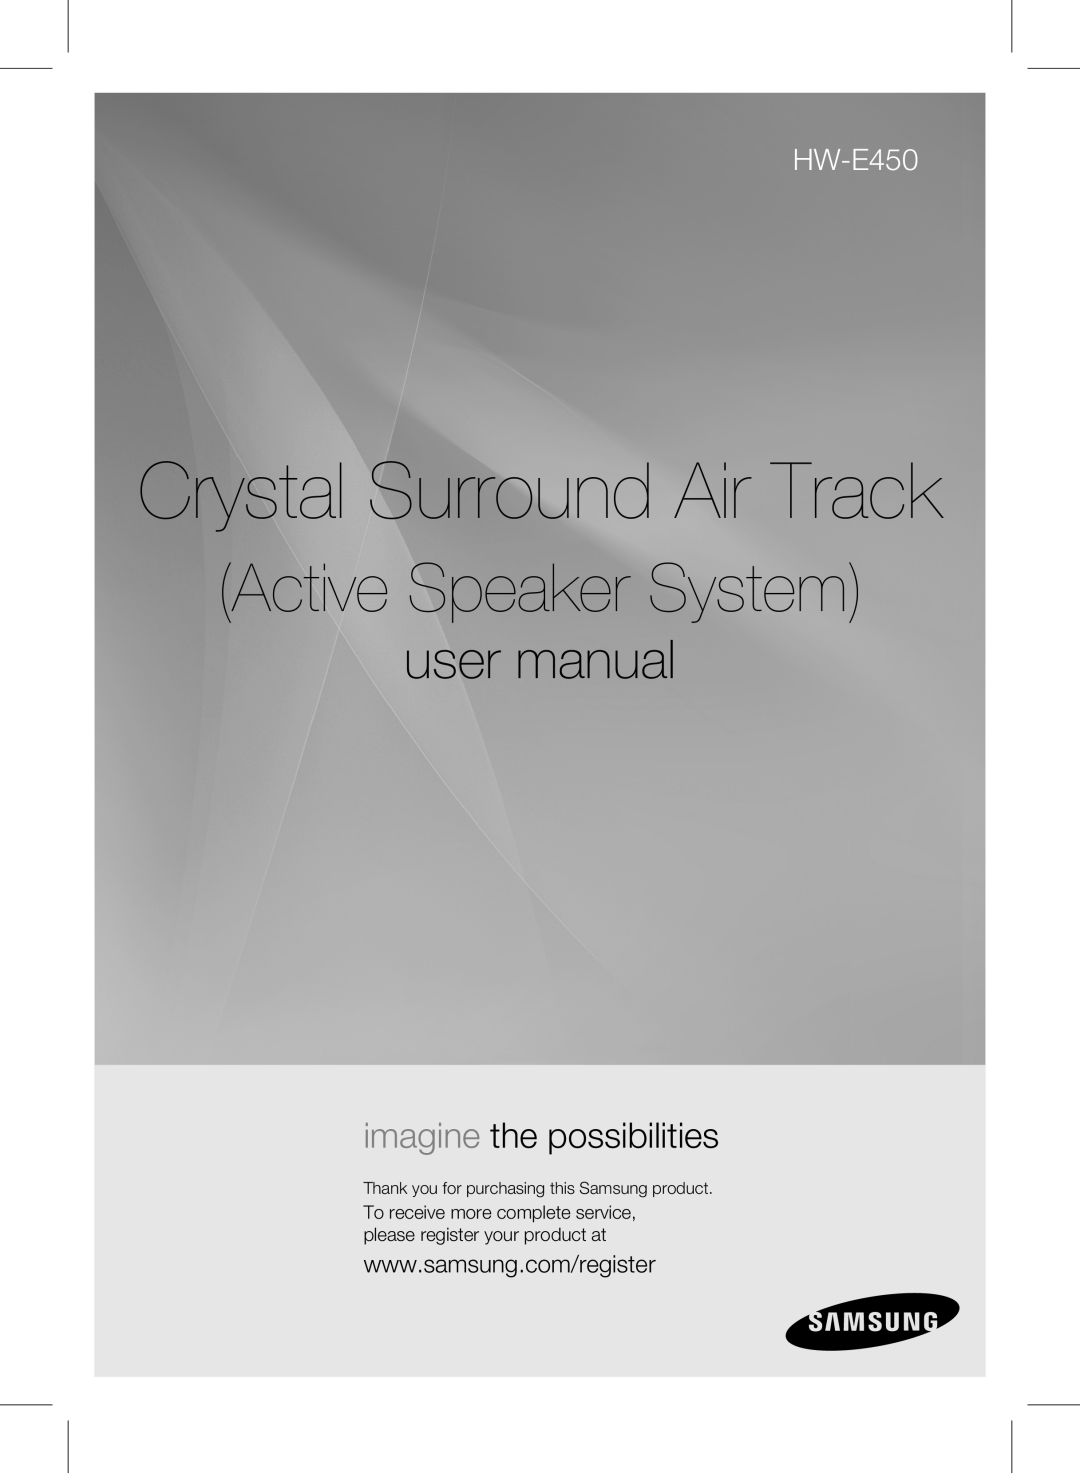 Samsung HW-E450 user manual Crystal Surround Air Track, Active Speaker System, imagine the possibilities 